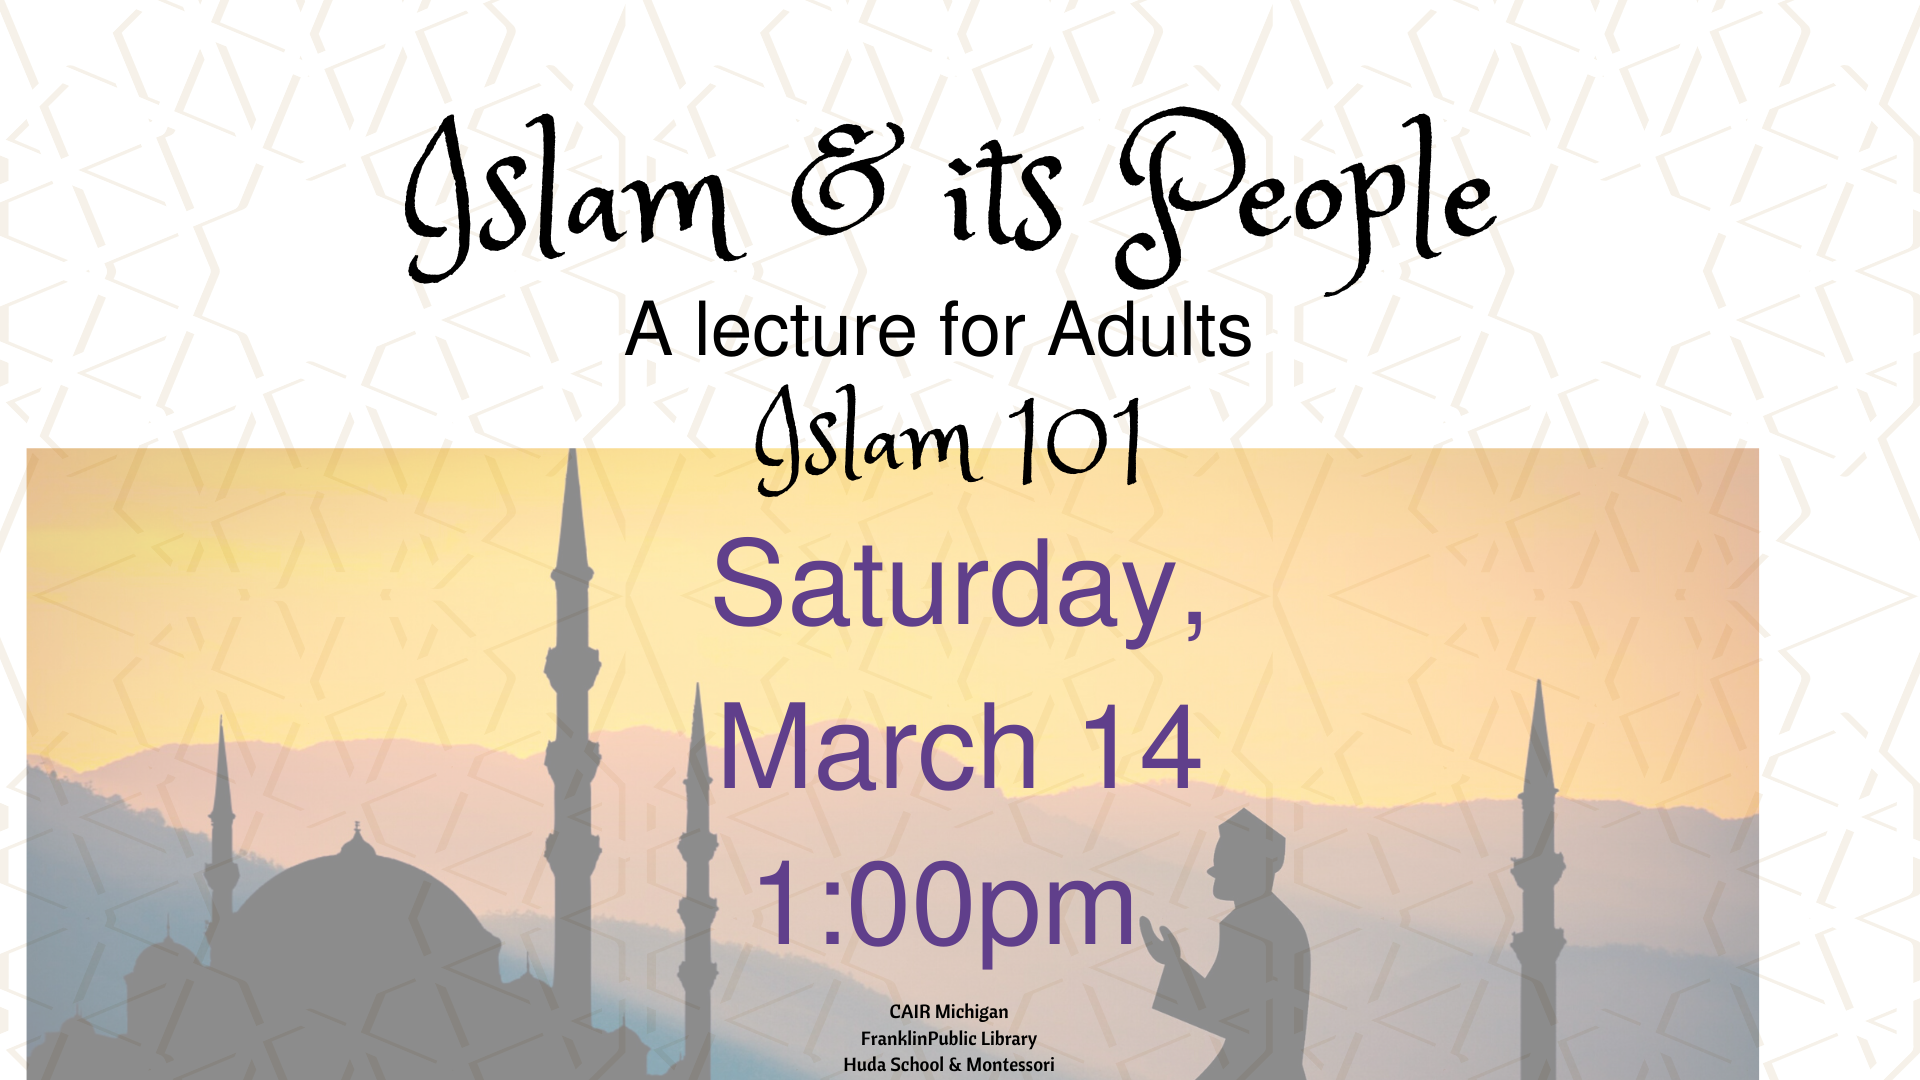 CAROUSEL Islam and its People - Lecture 3.14.20.png